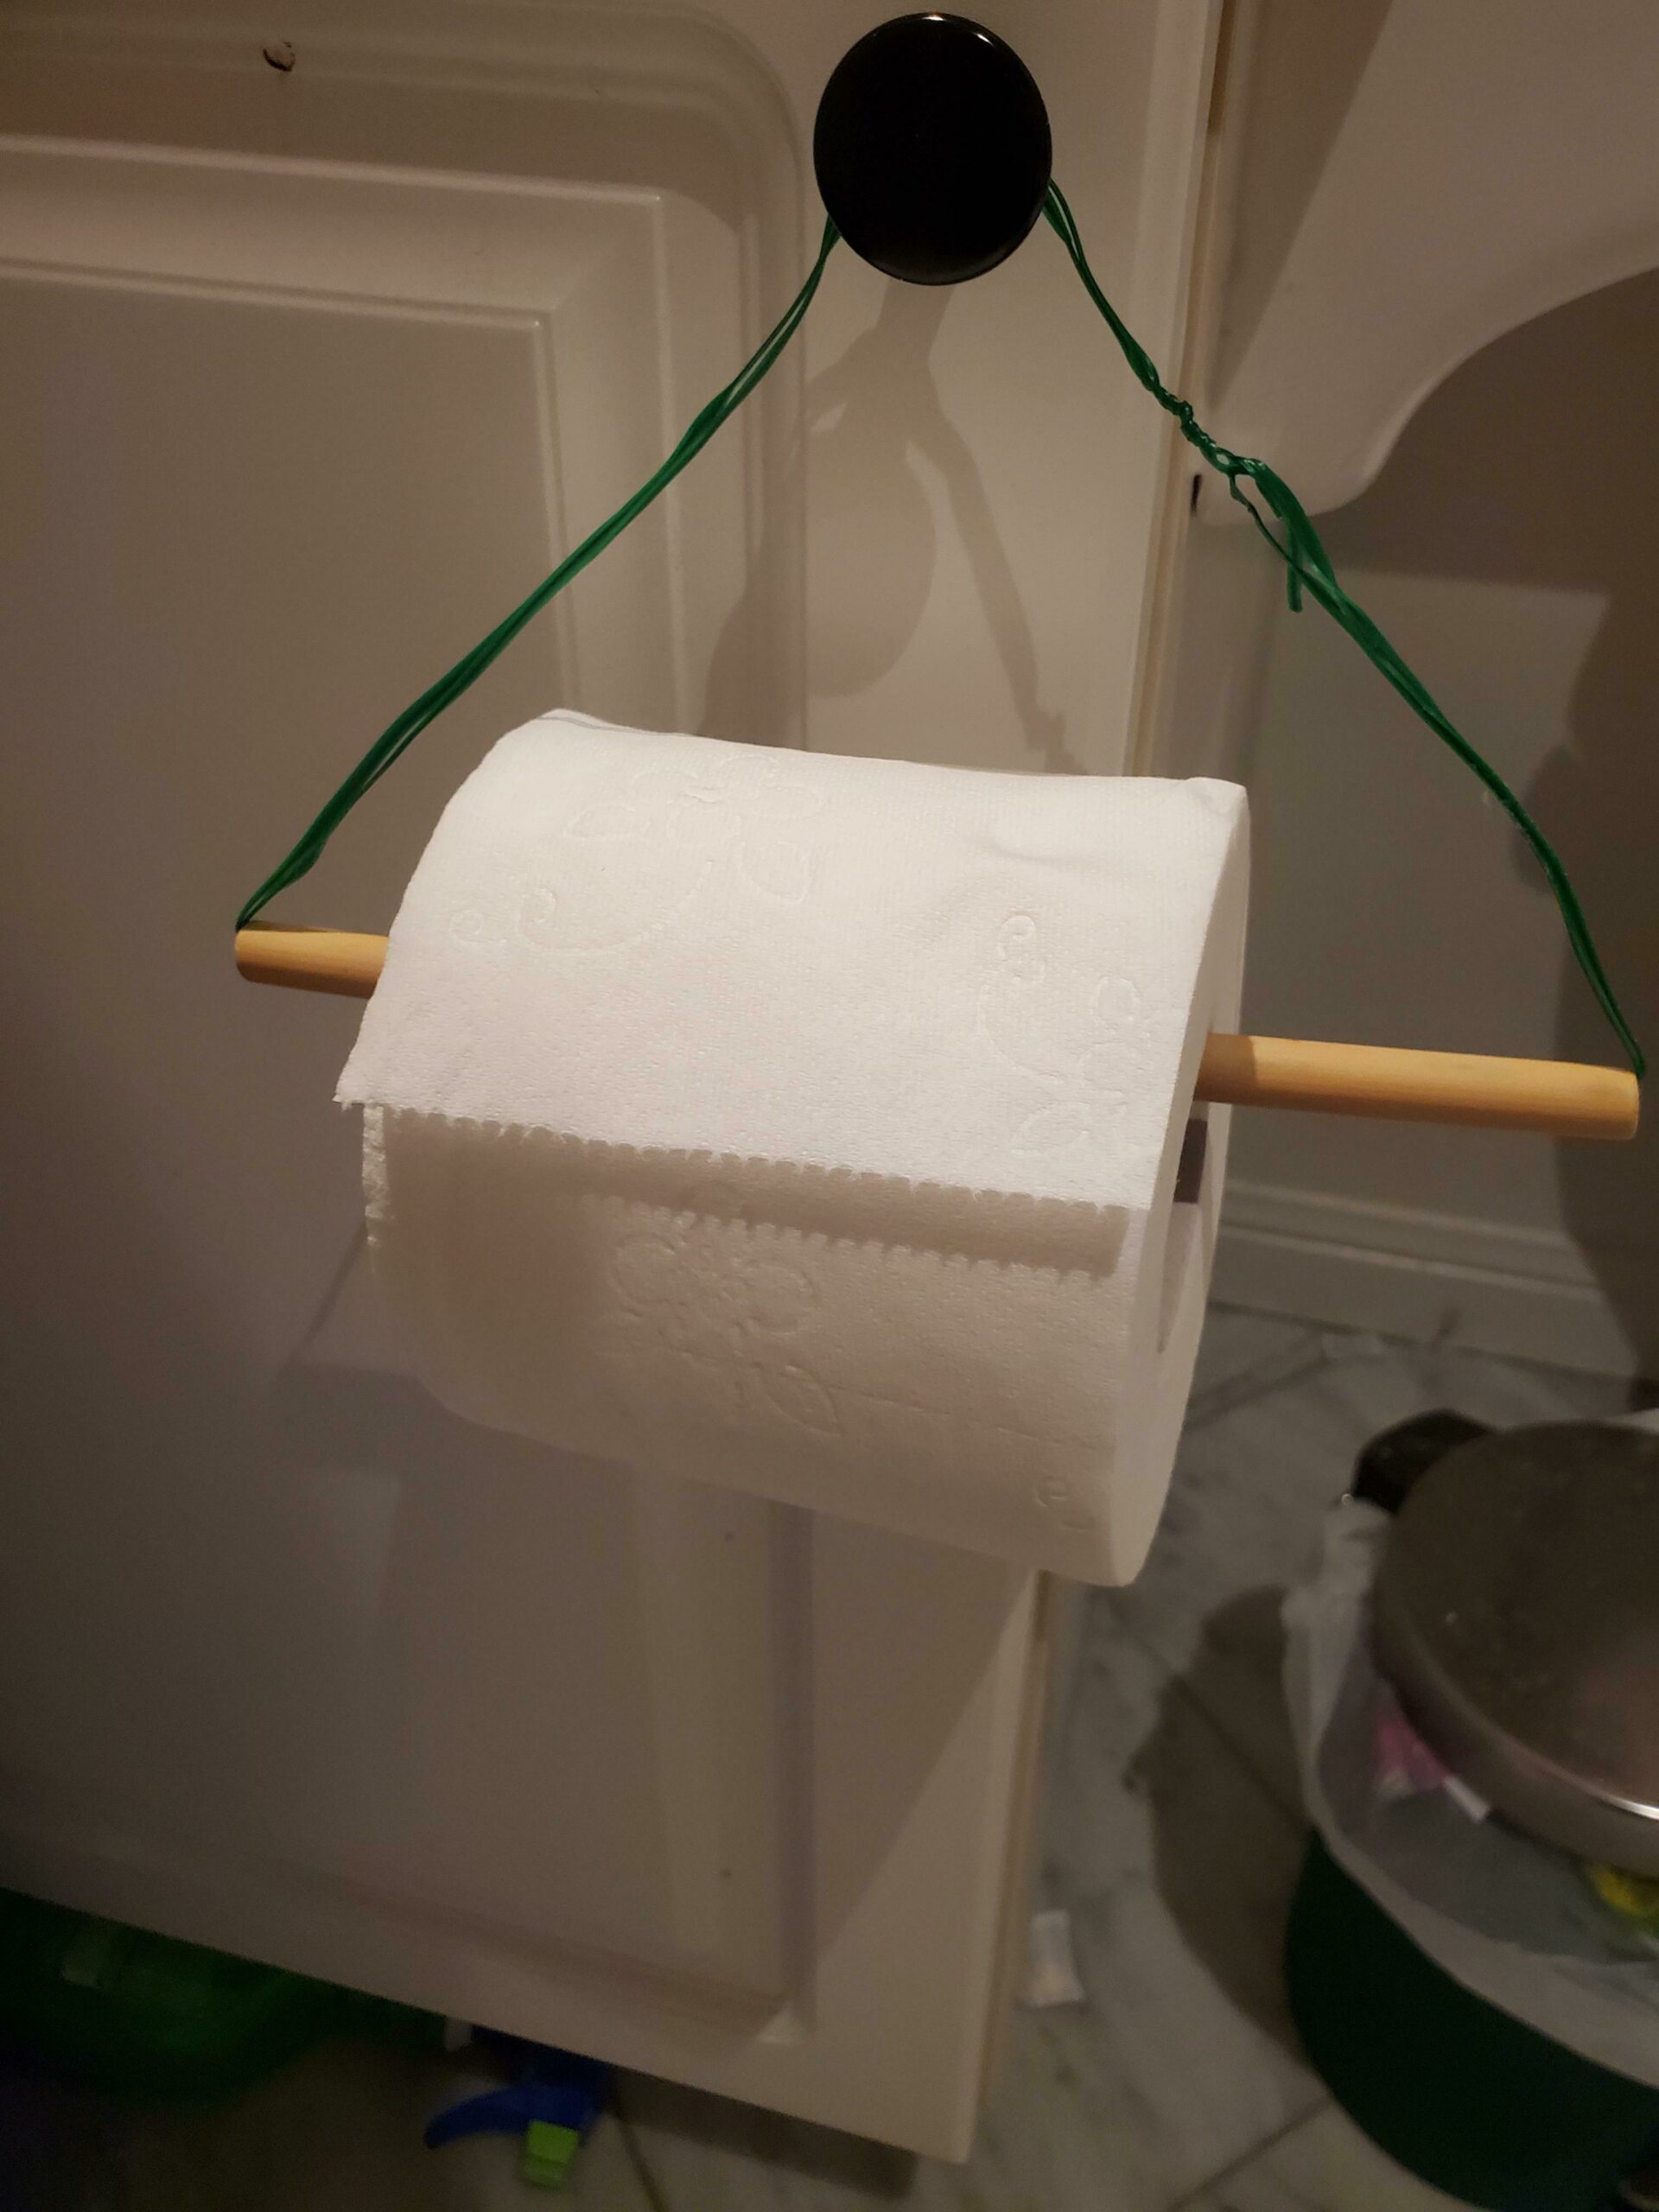 Does This Qualify? My Toilet Paper Holder Broke